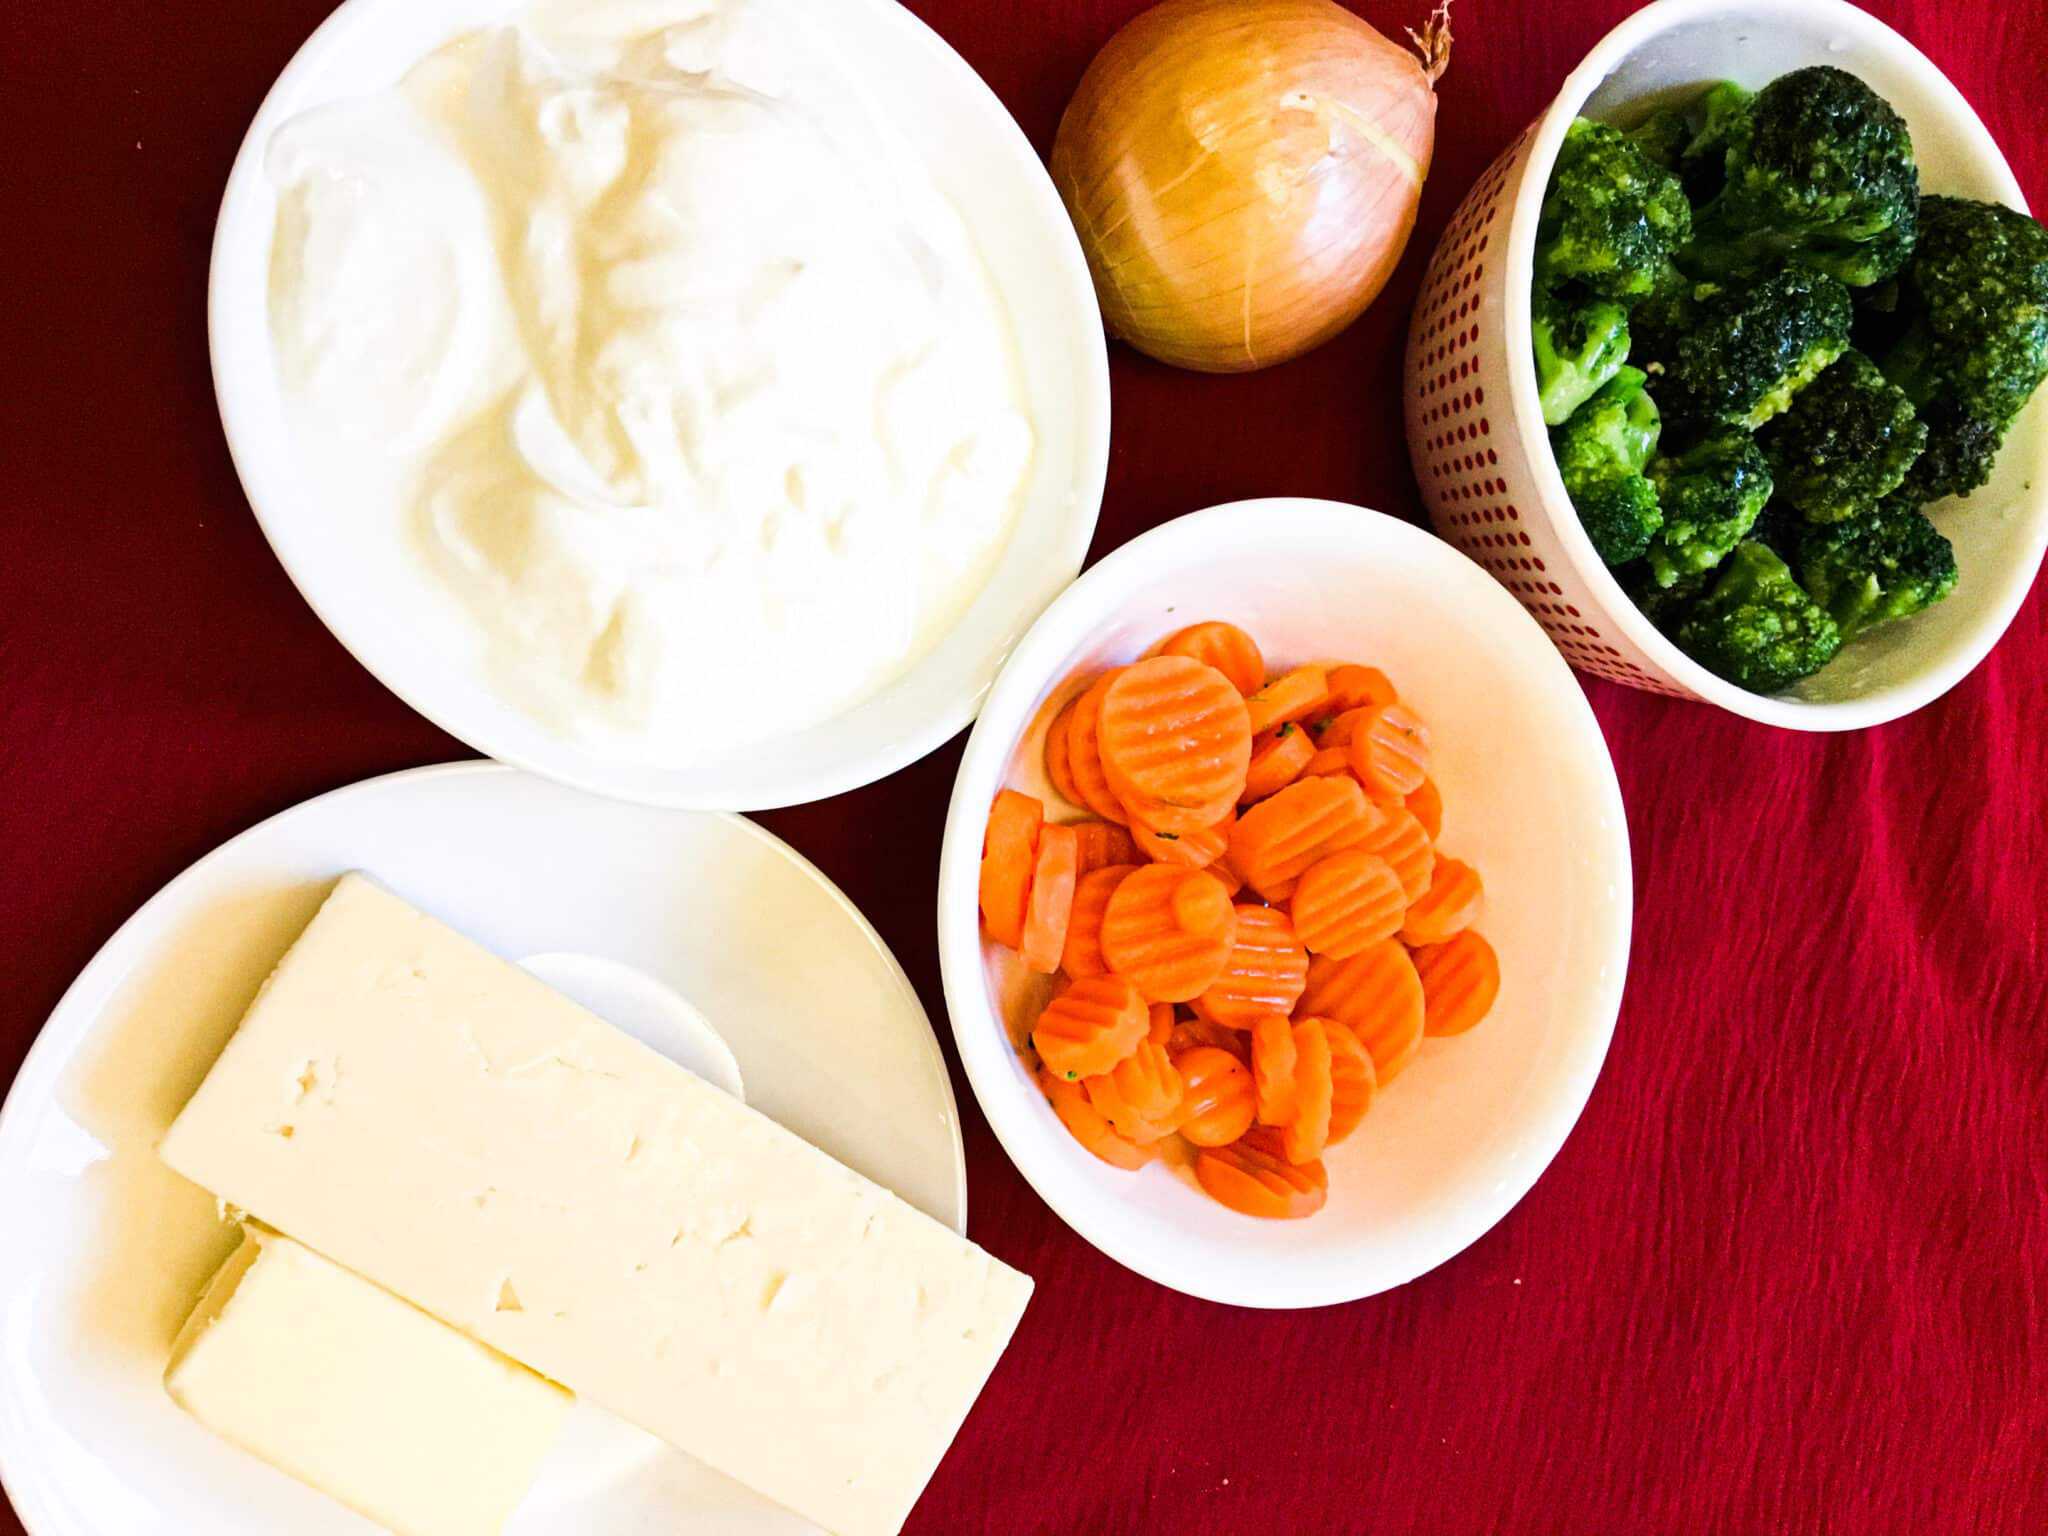 ingredients to make broccoli cheddar soup